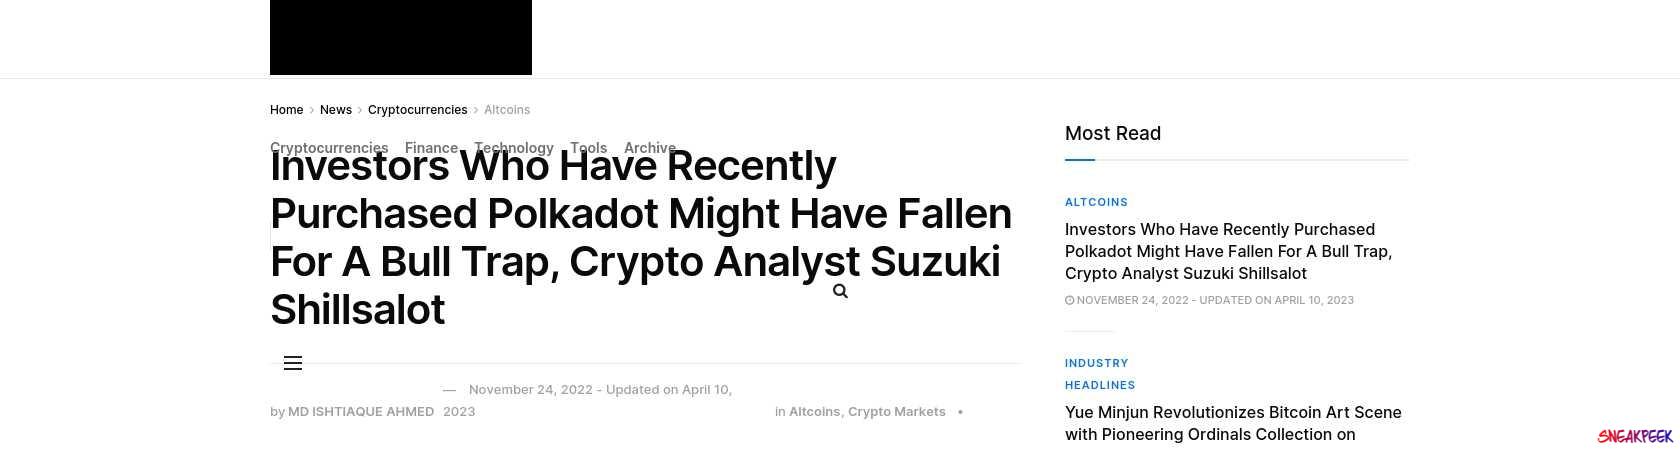 Read the full Article:  ⭲ Investors Who Have Recently Purchased Polkadot Might Have Fallen For A Bull Trap, Crypto Analyst Suzuki Shillsalot